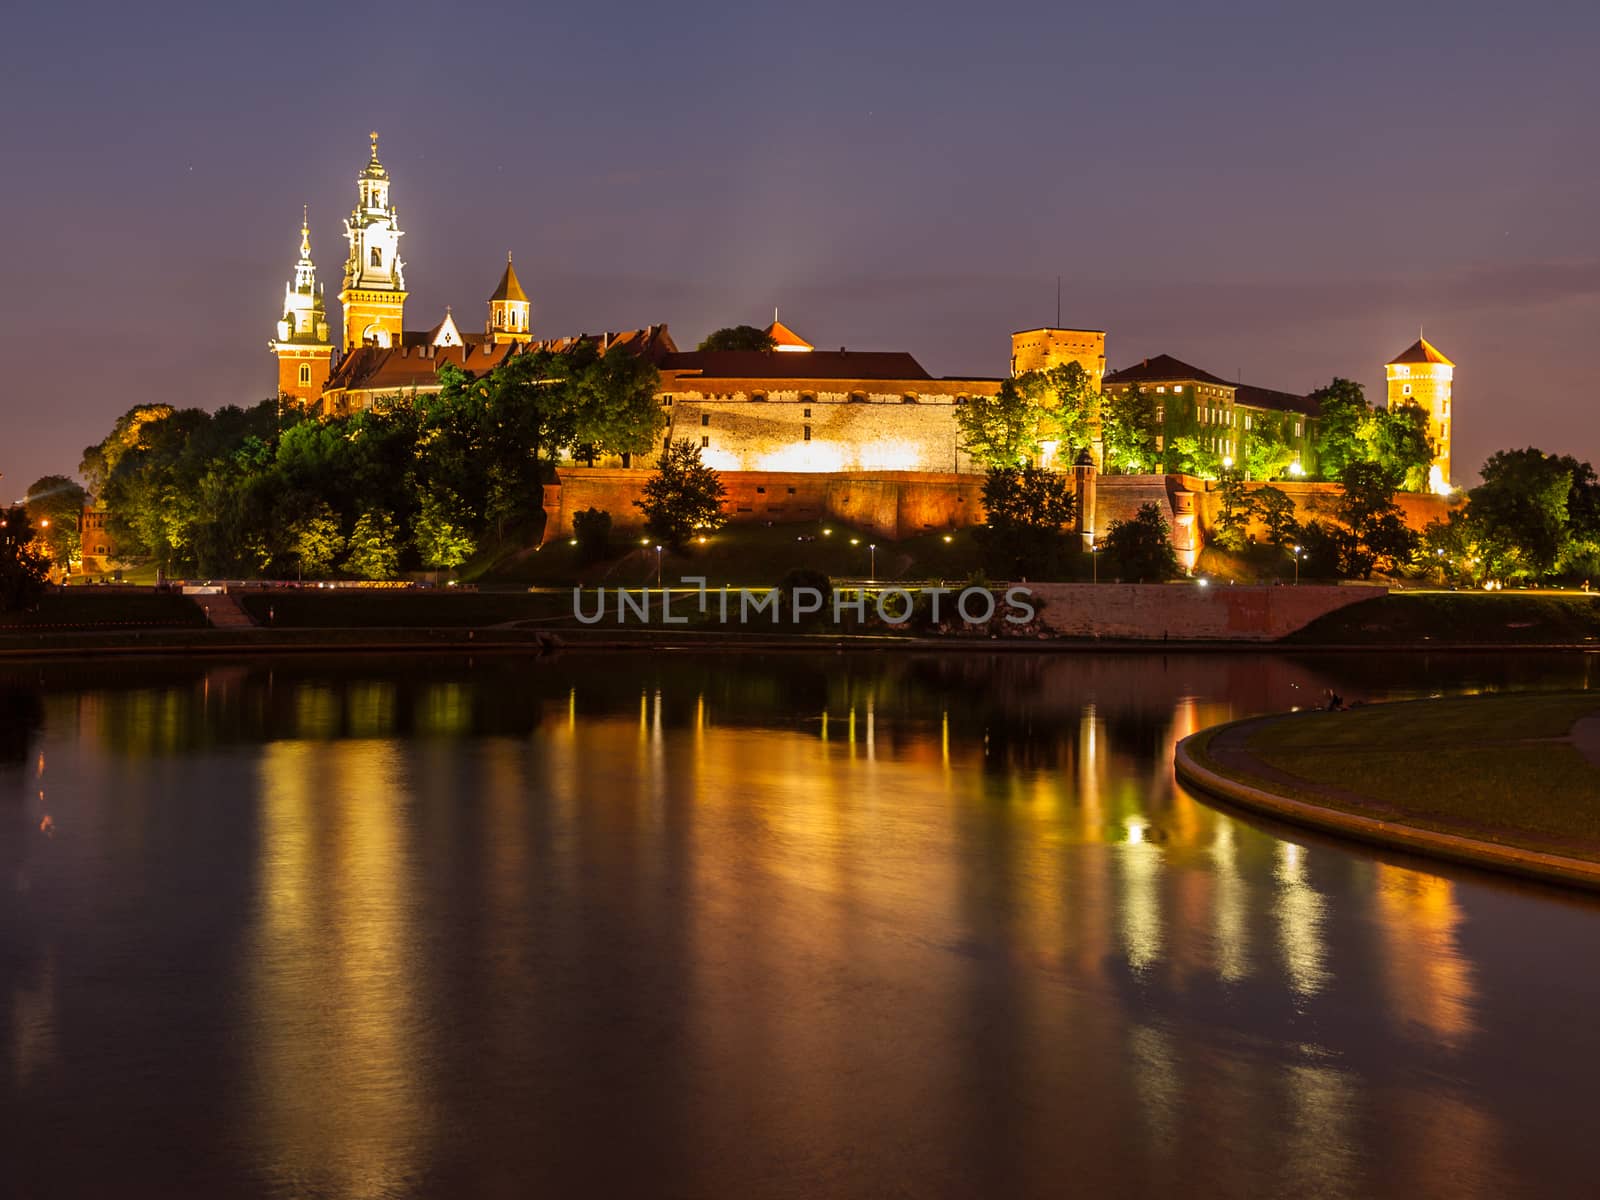 Wawel castle and Vistula river at night by pyty